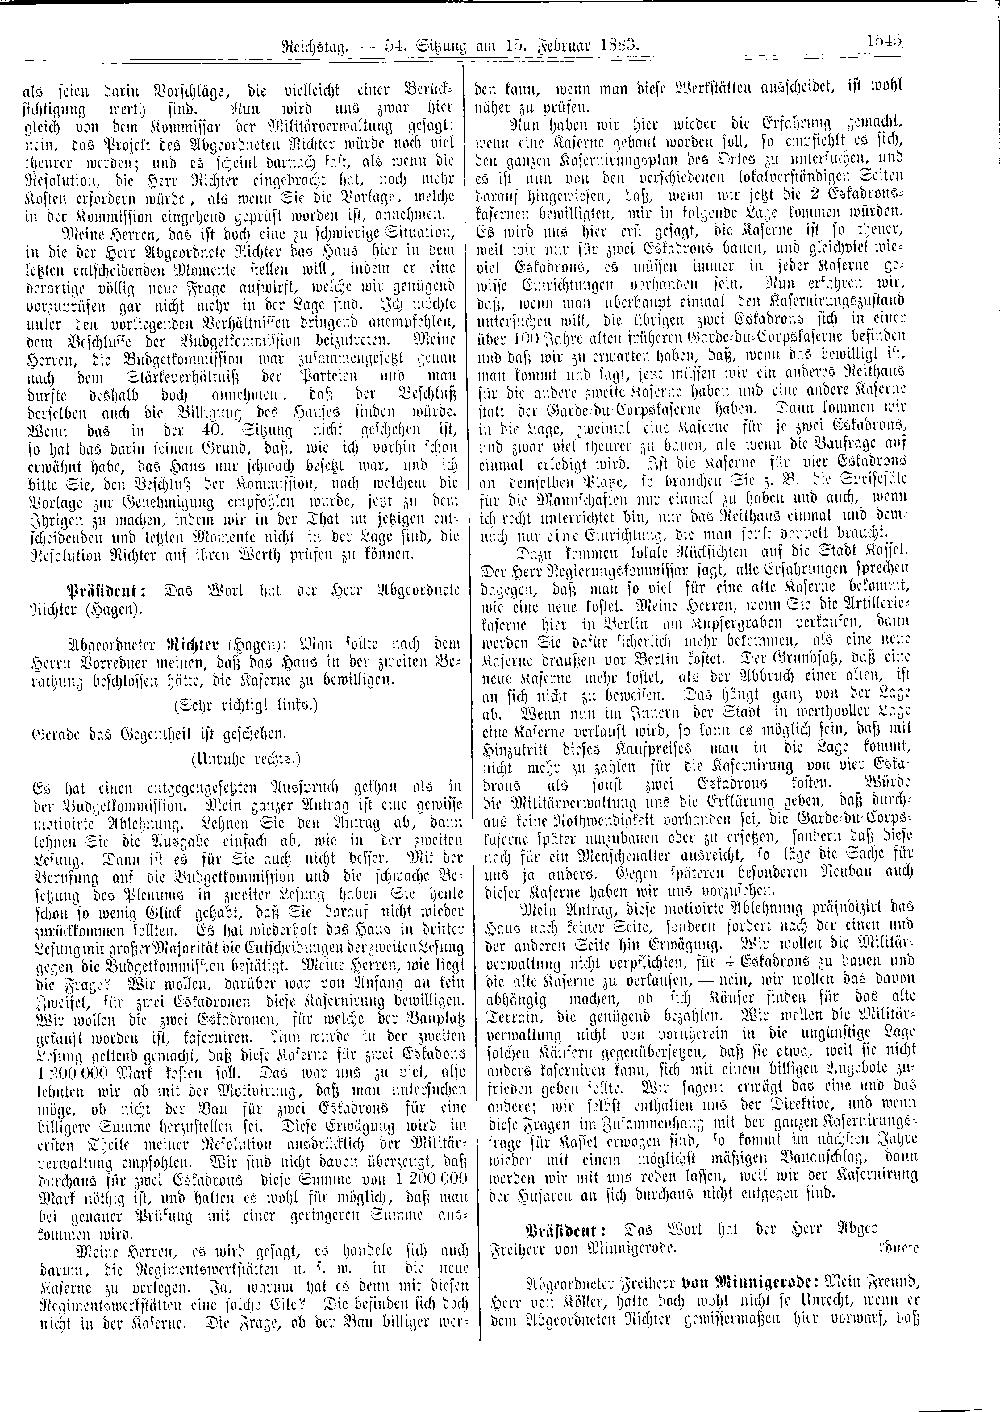 Scan of page 1545